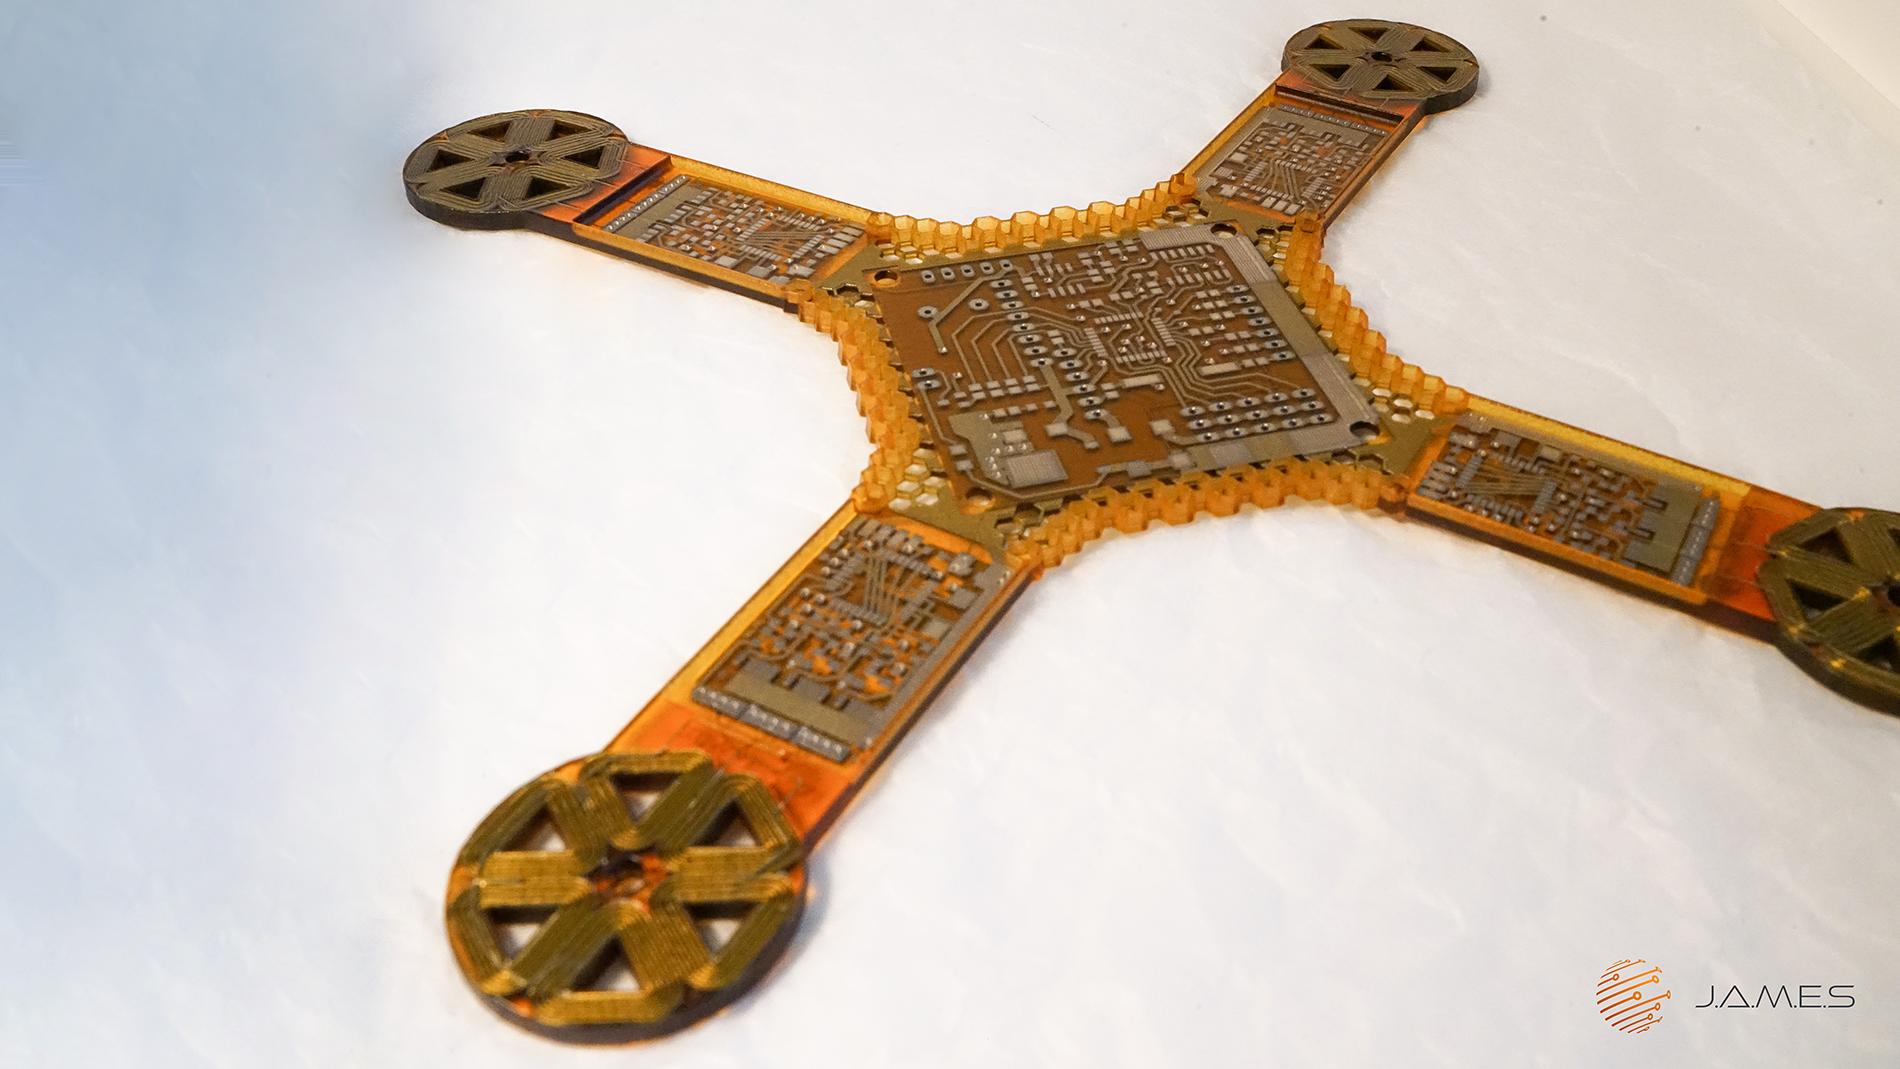 A glimpse of the future of additively manufactured electronics: J.A.M.E.S’s electronic drone framework, including all the circuit paths and motor coils. Image: J.A.M.E.S.